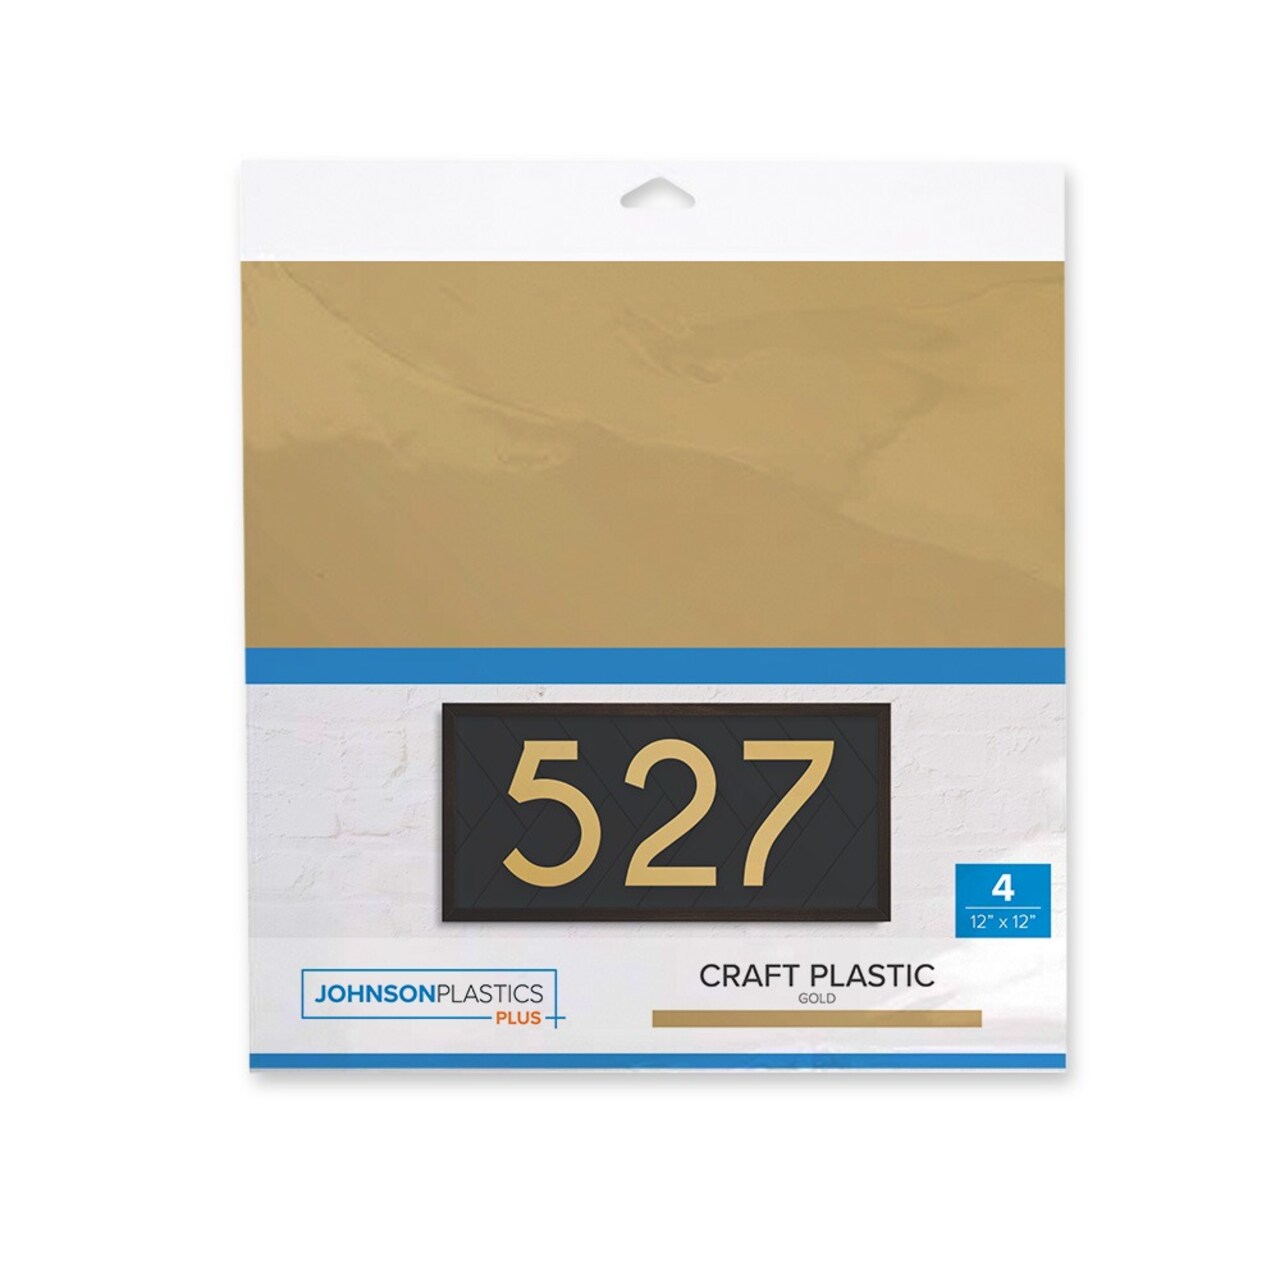 Craft Plastic Sheet Pack, Gold - 4 sheets per pack